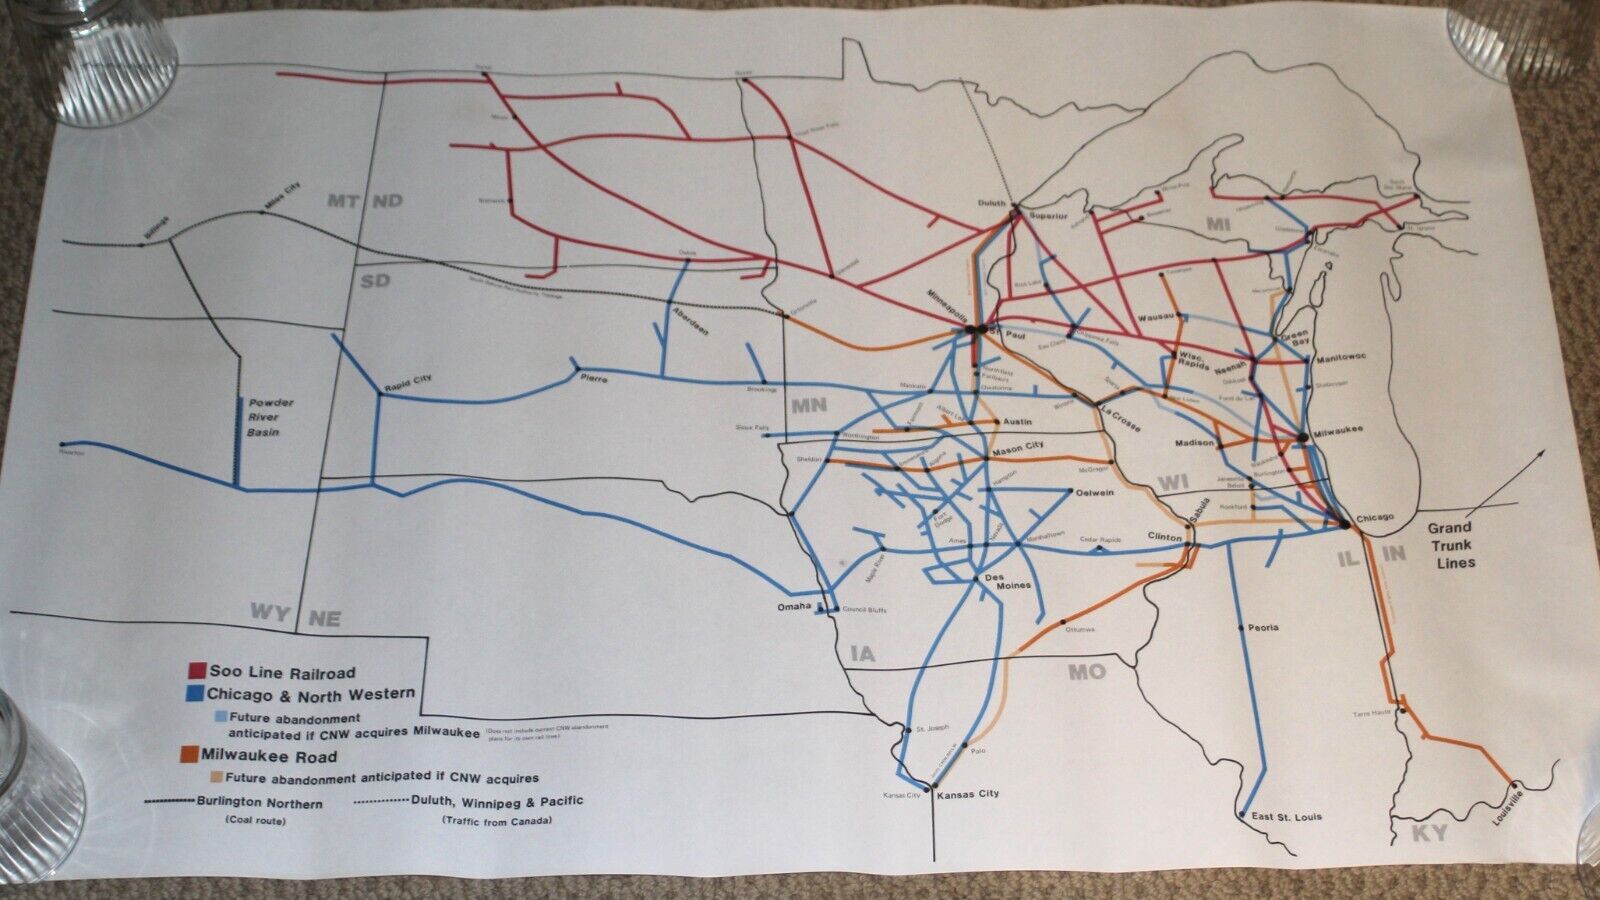 Original Map Showing Impact of CNW Acquisition of Milwaukee Road